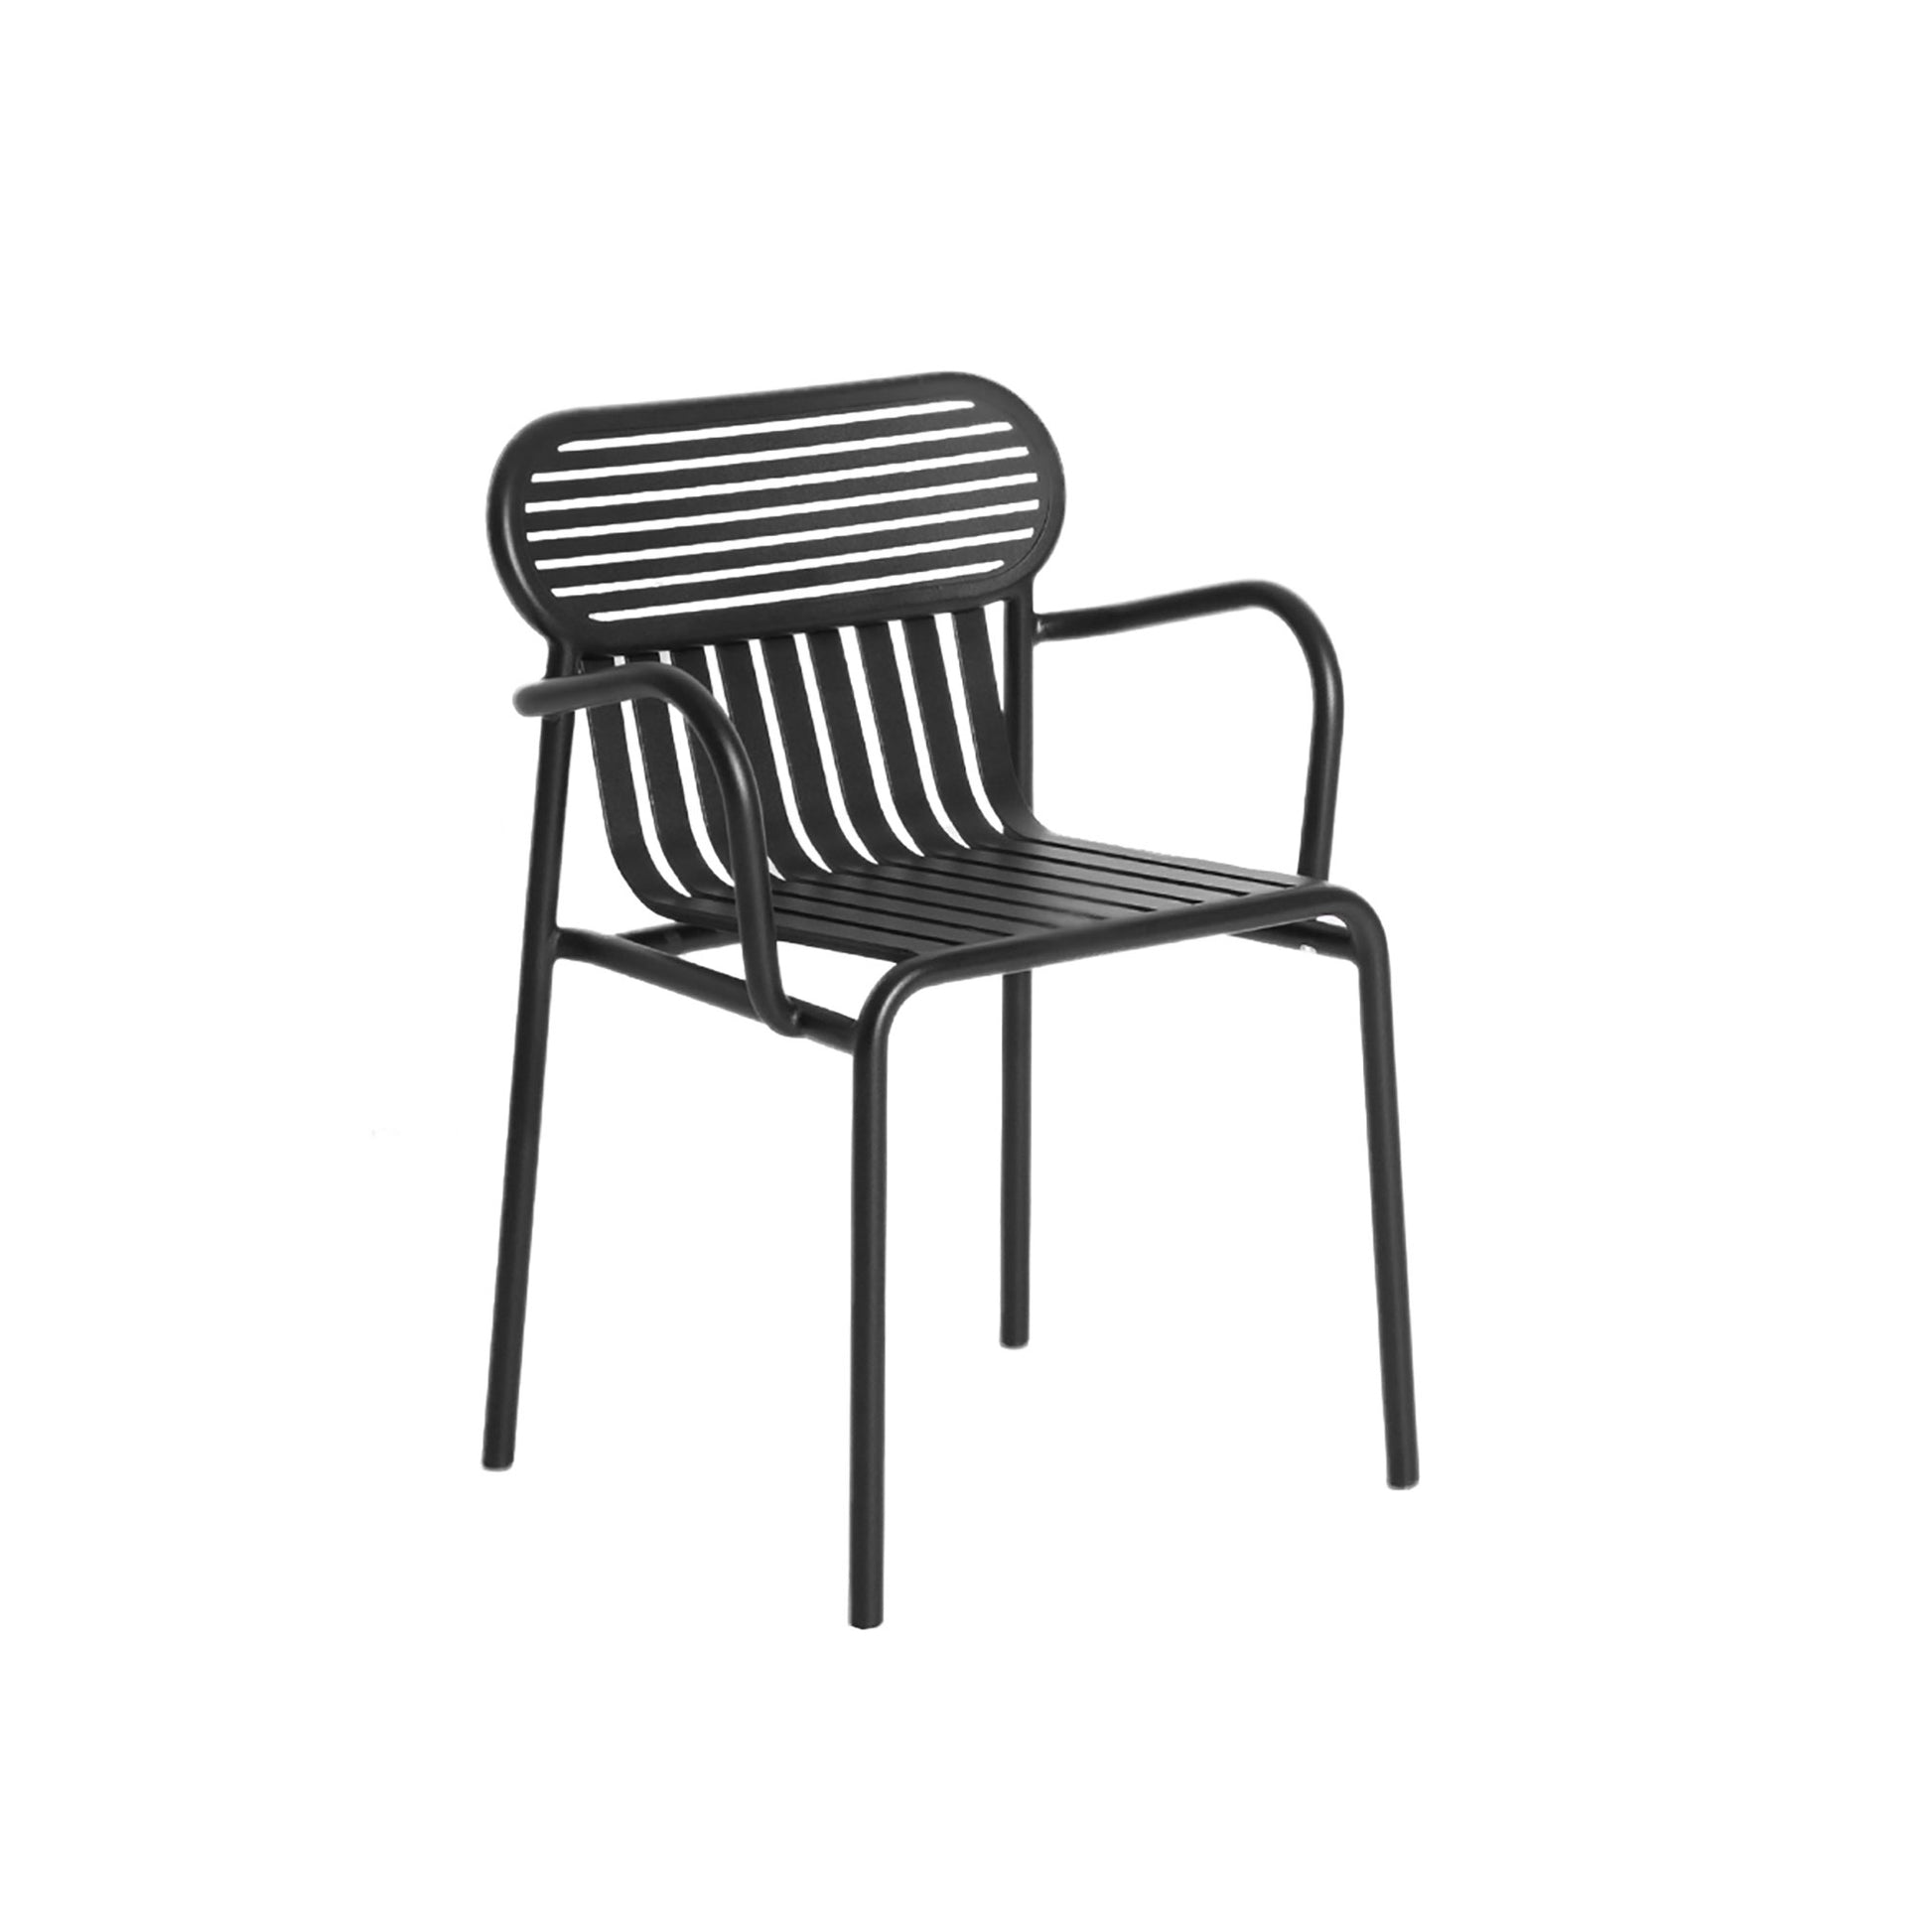 WEEK-END Dining Chair with Armrests by Petite Friture #Black